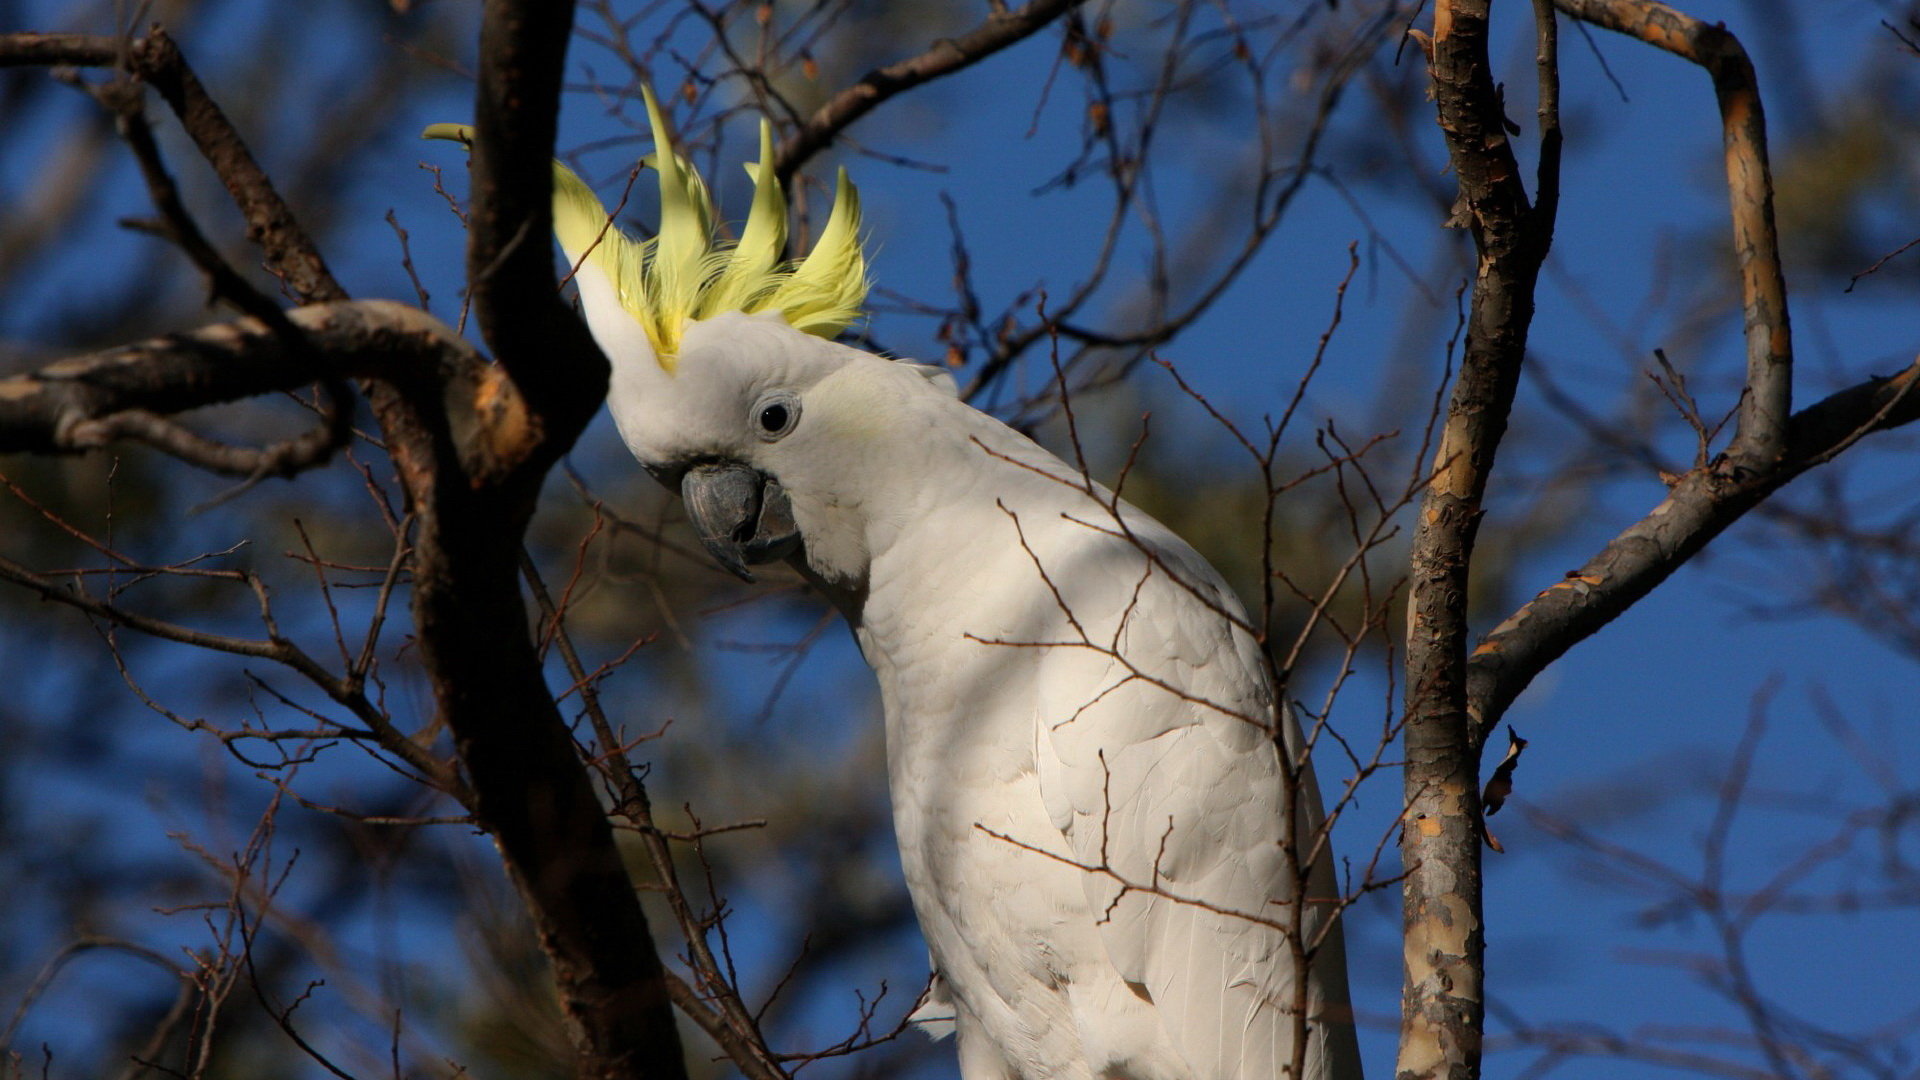 Download full hd 1080p Sulphur-crested Cockatoo PC background ID:130247 for free